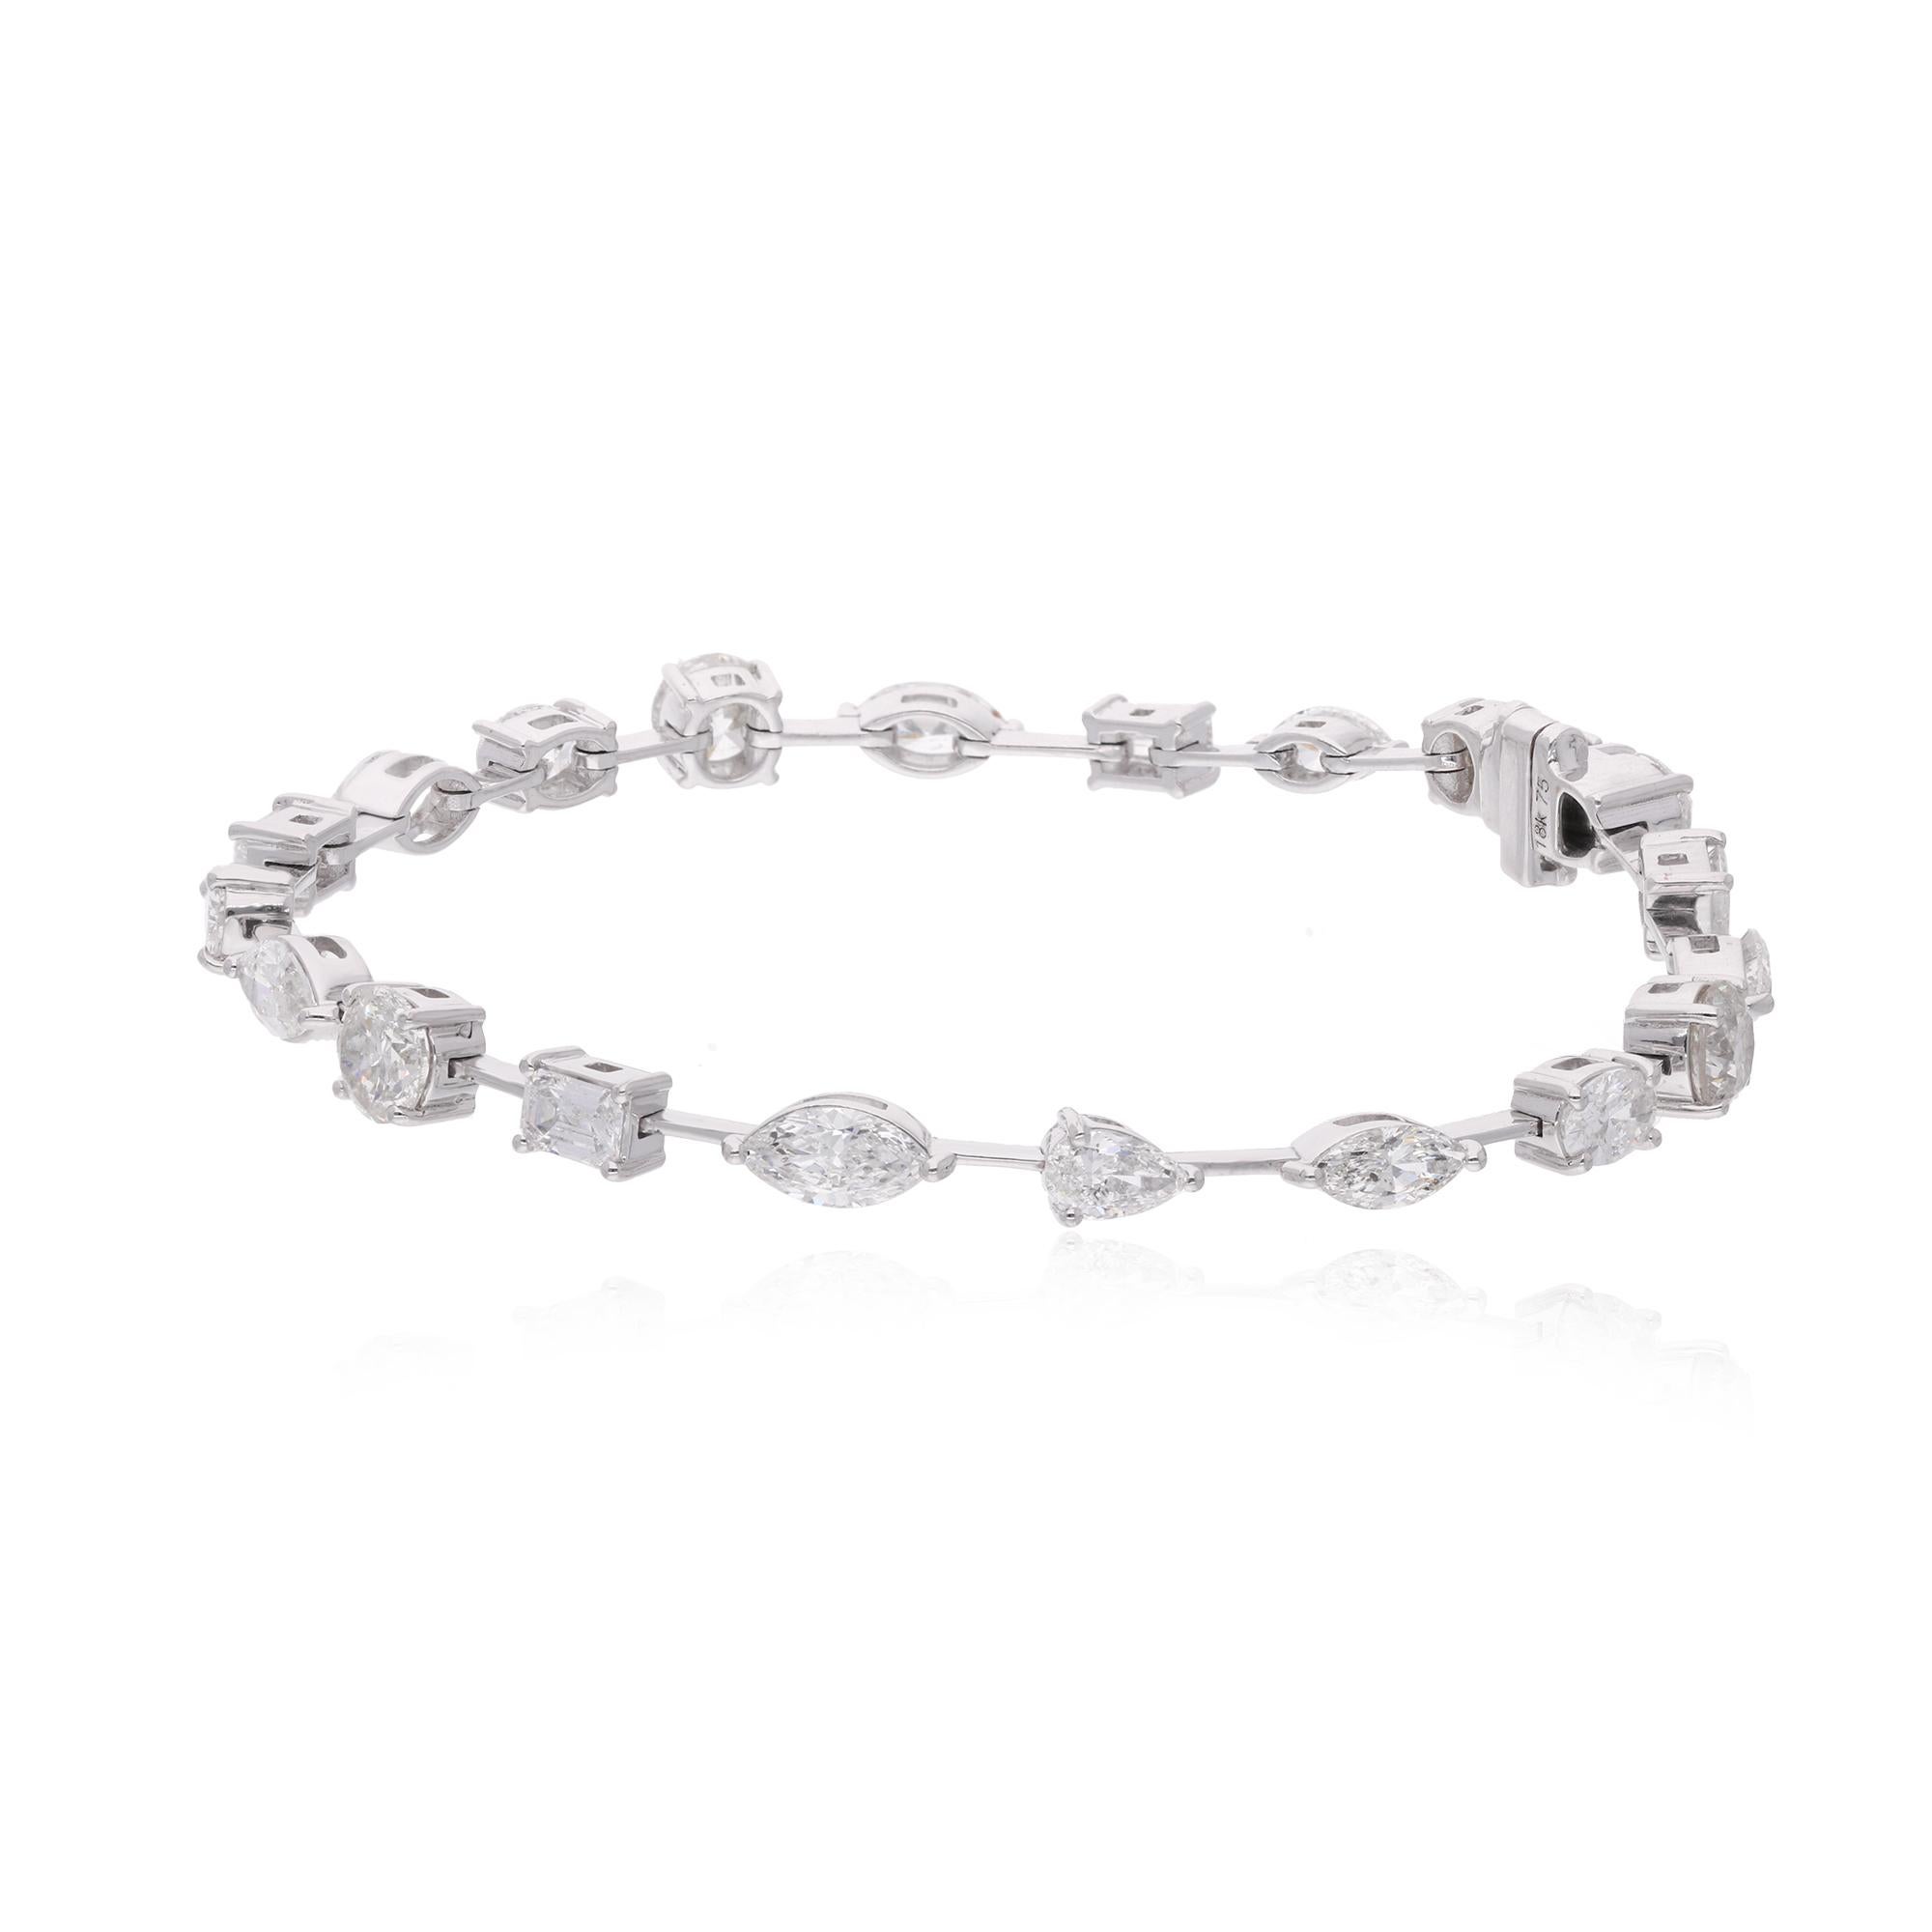 Introducing our stunning Diamond Charm Bracelet, a timeless piece that is perfect for any occasion. This exquisite bracelet features a delicate chain made from SOLID 18K WHITE GOLD, elegantly adorned with sparkling Natural Diamonds. The bracelet is